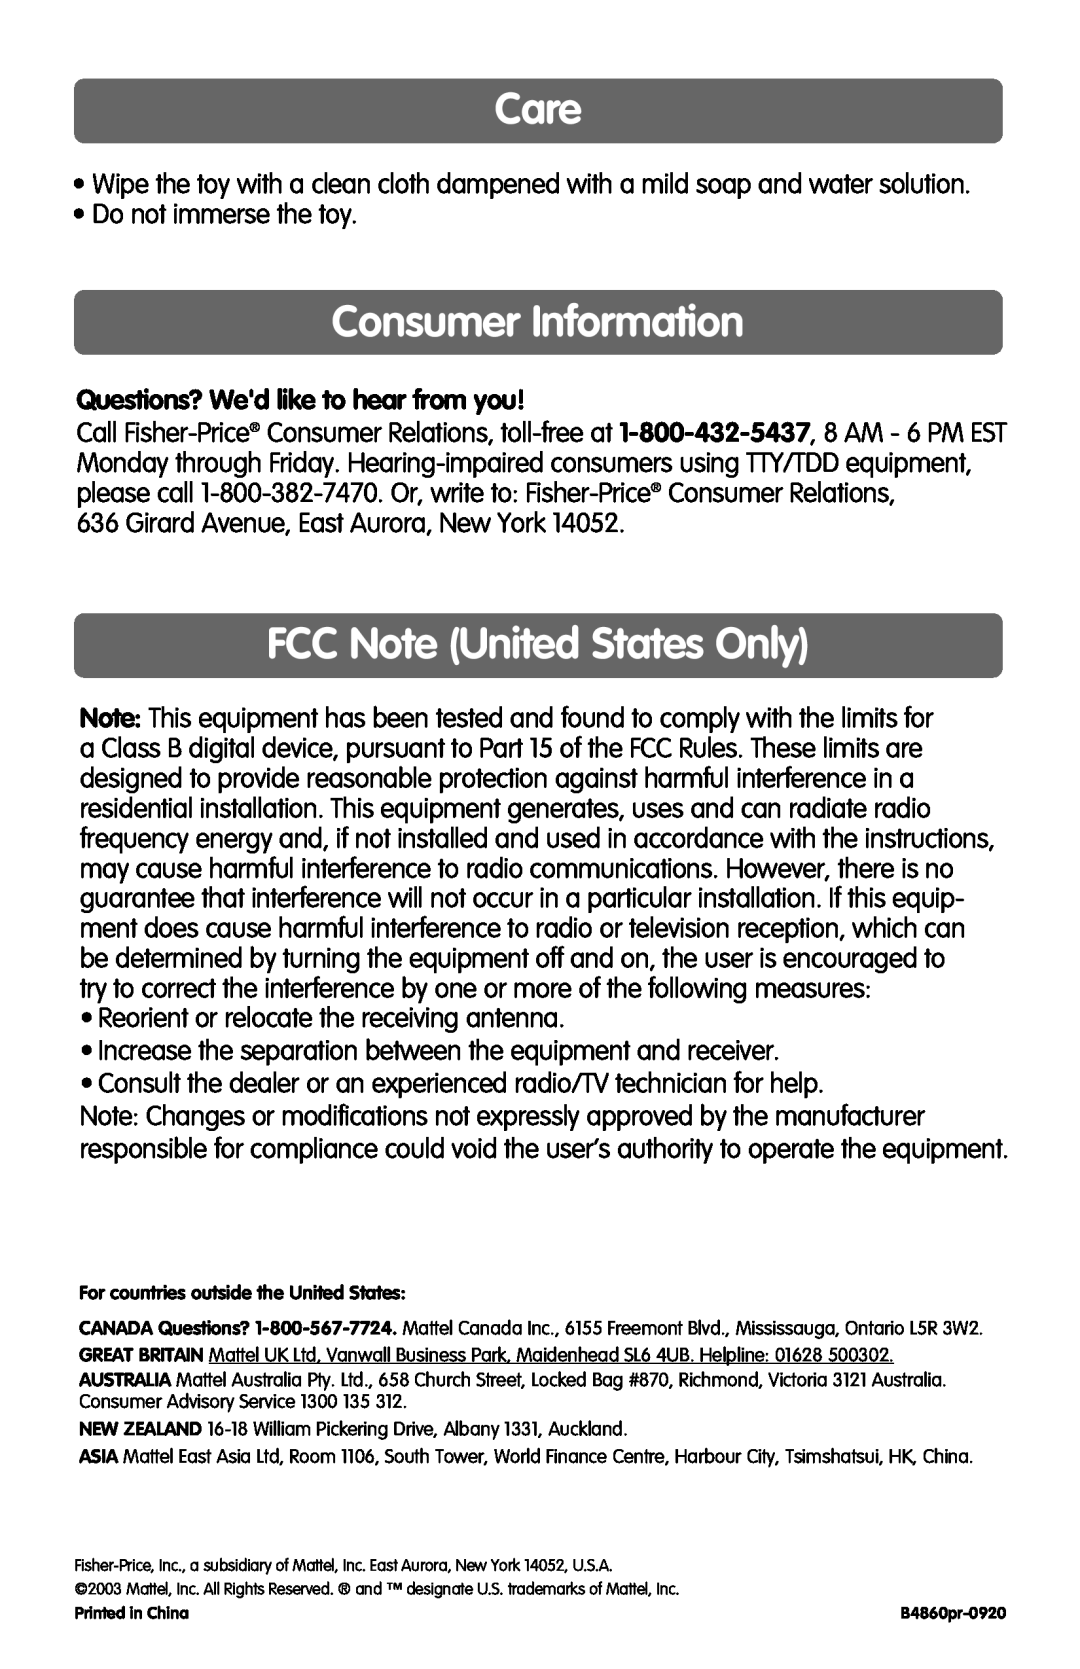 Fisher-Price B4860 Care, Consumer Information, FCC Note United States Only, Questions? Wed like to hear from you 